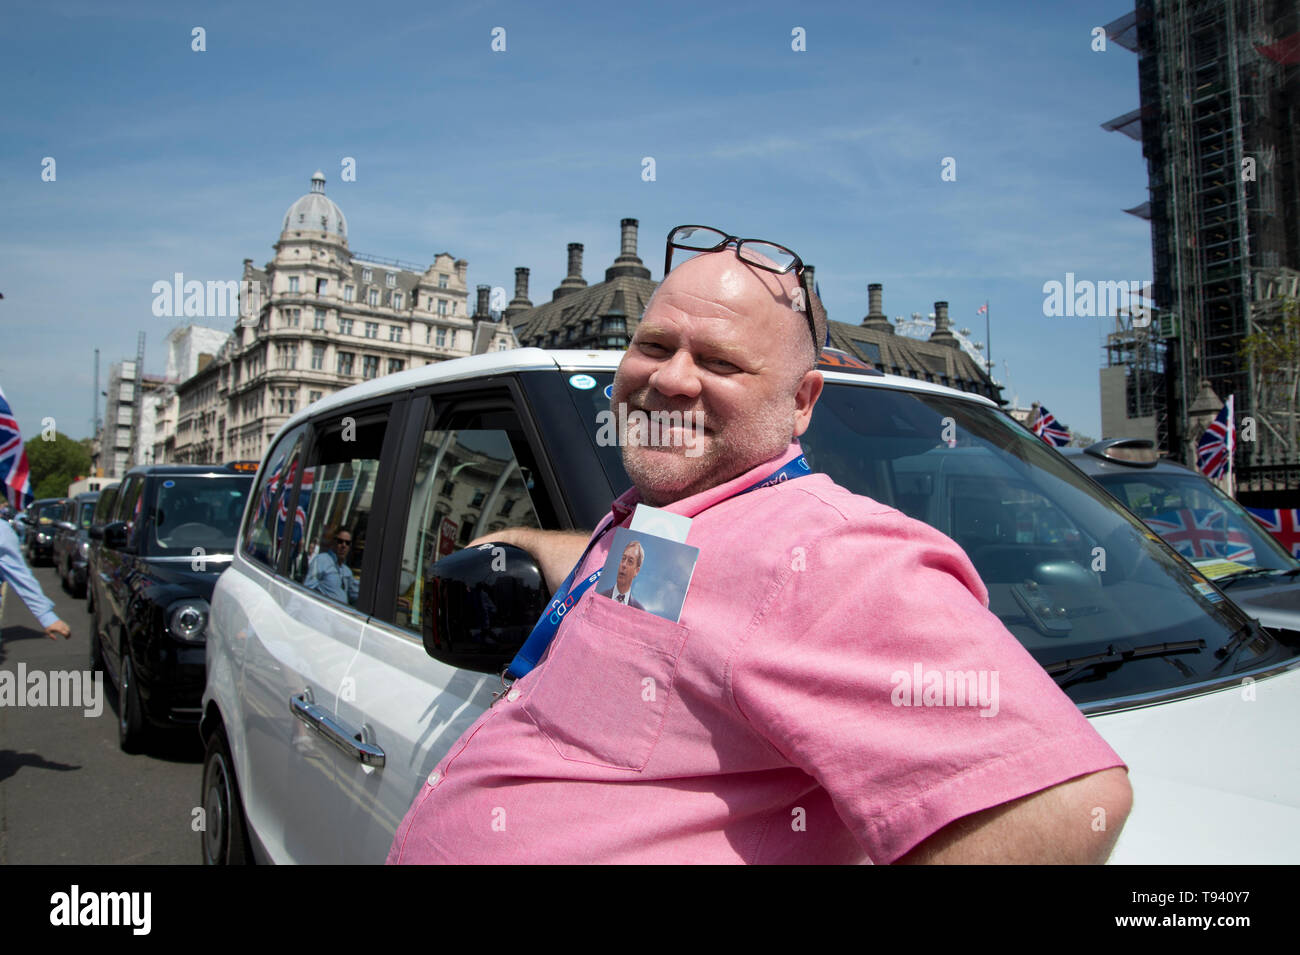 Parliament Square, Westminster, London. May 16th 2019. Striking taxi driver with a photo of Nigel Farage in his pocket. Stock Photo